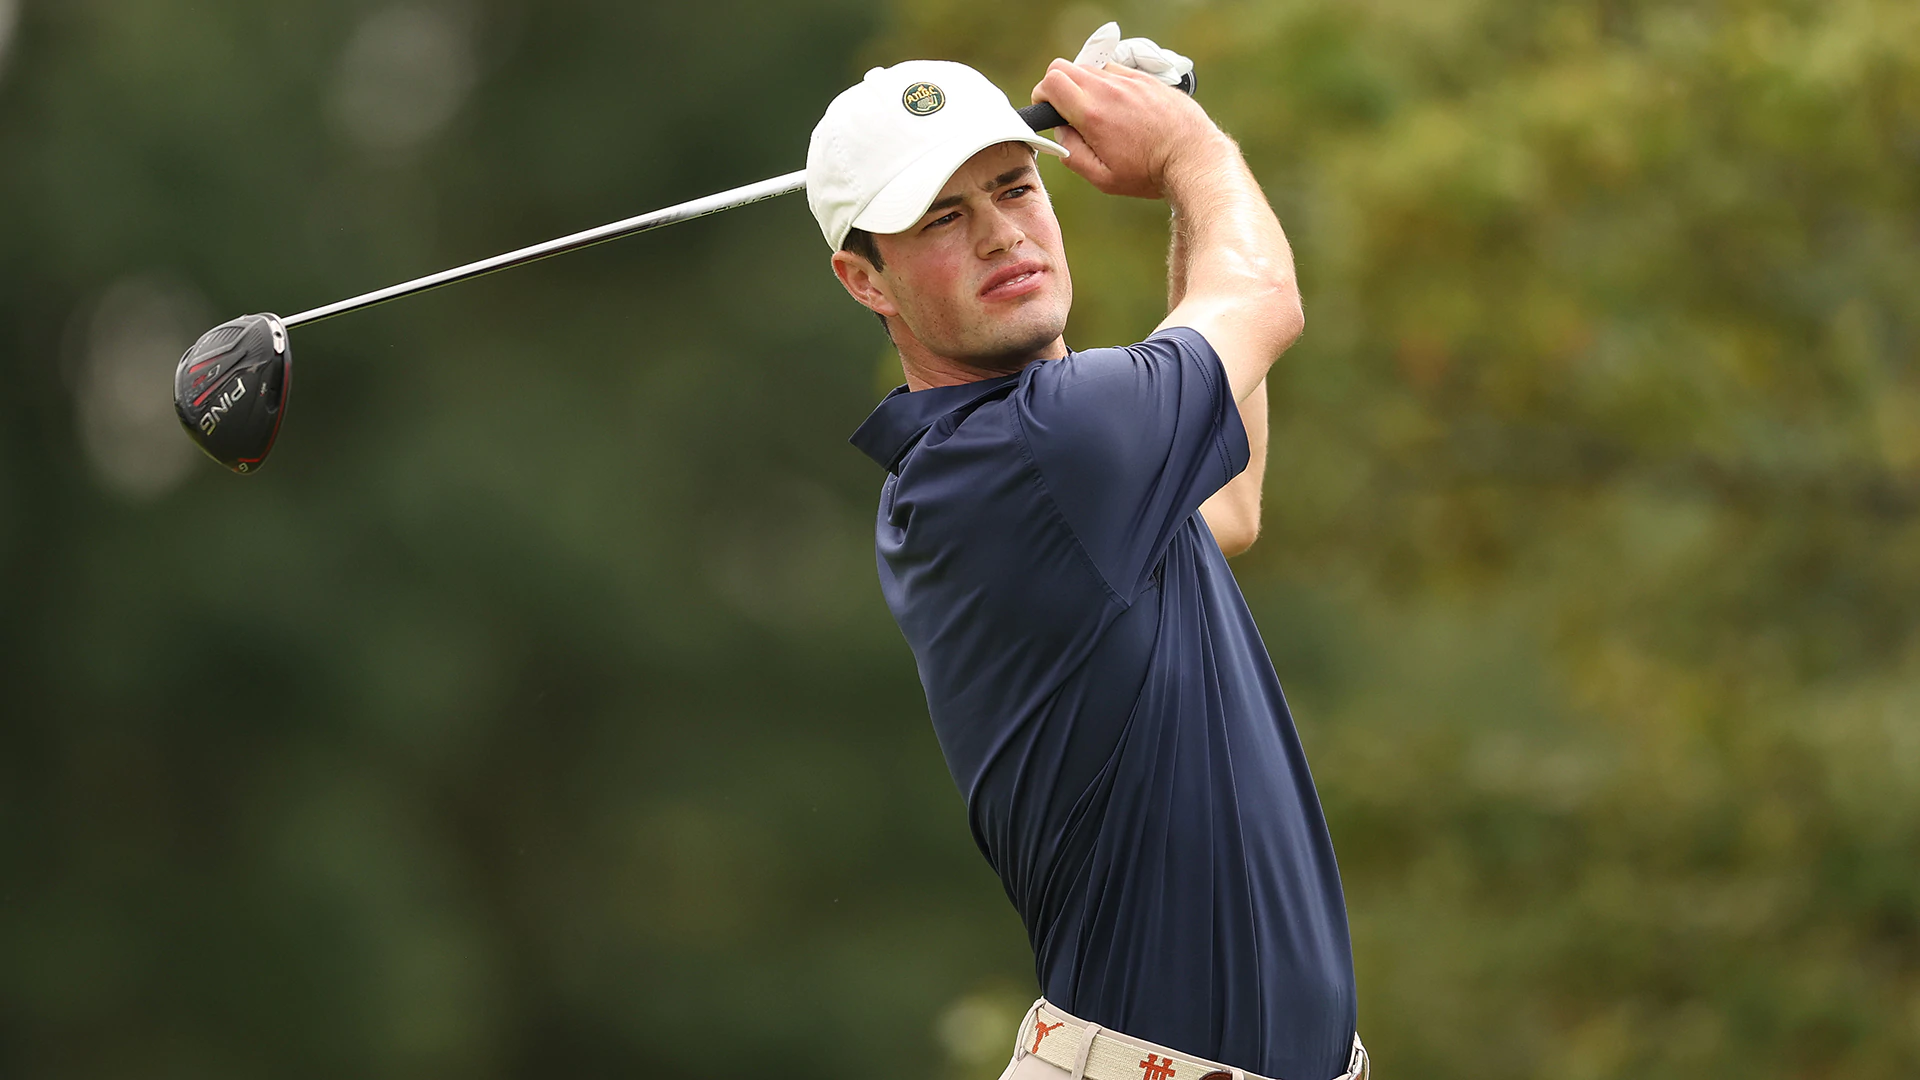 Perfect timing: Cole Hammer ends win drought in South Beach, boosts Walker Cup stock